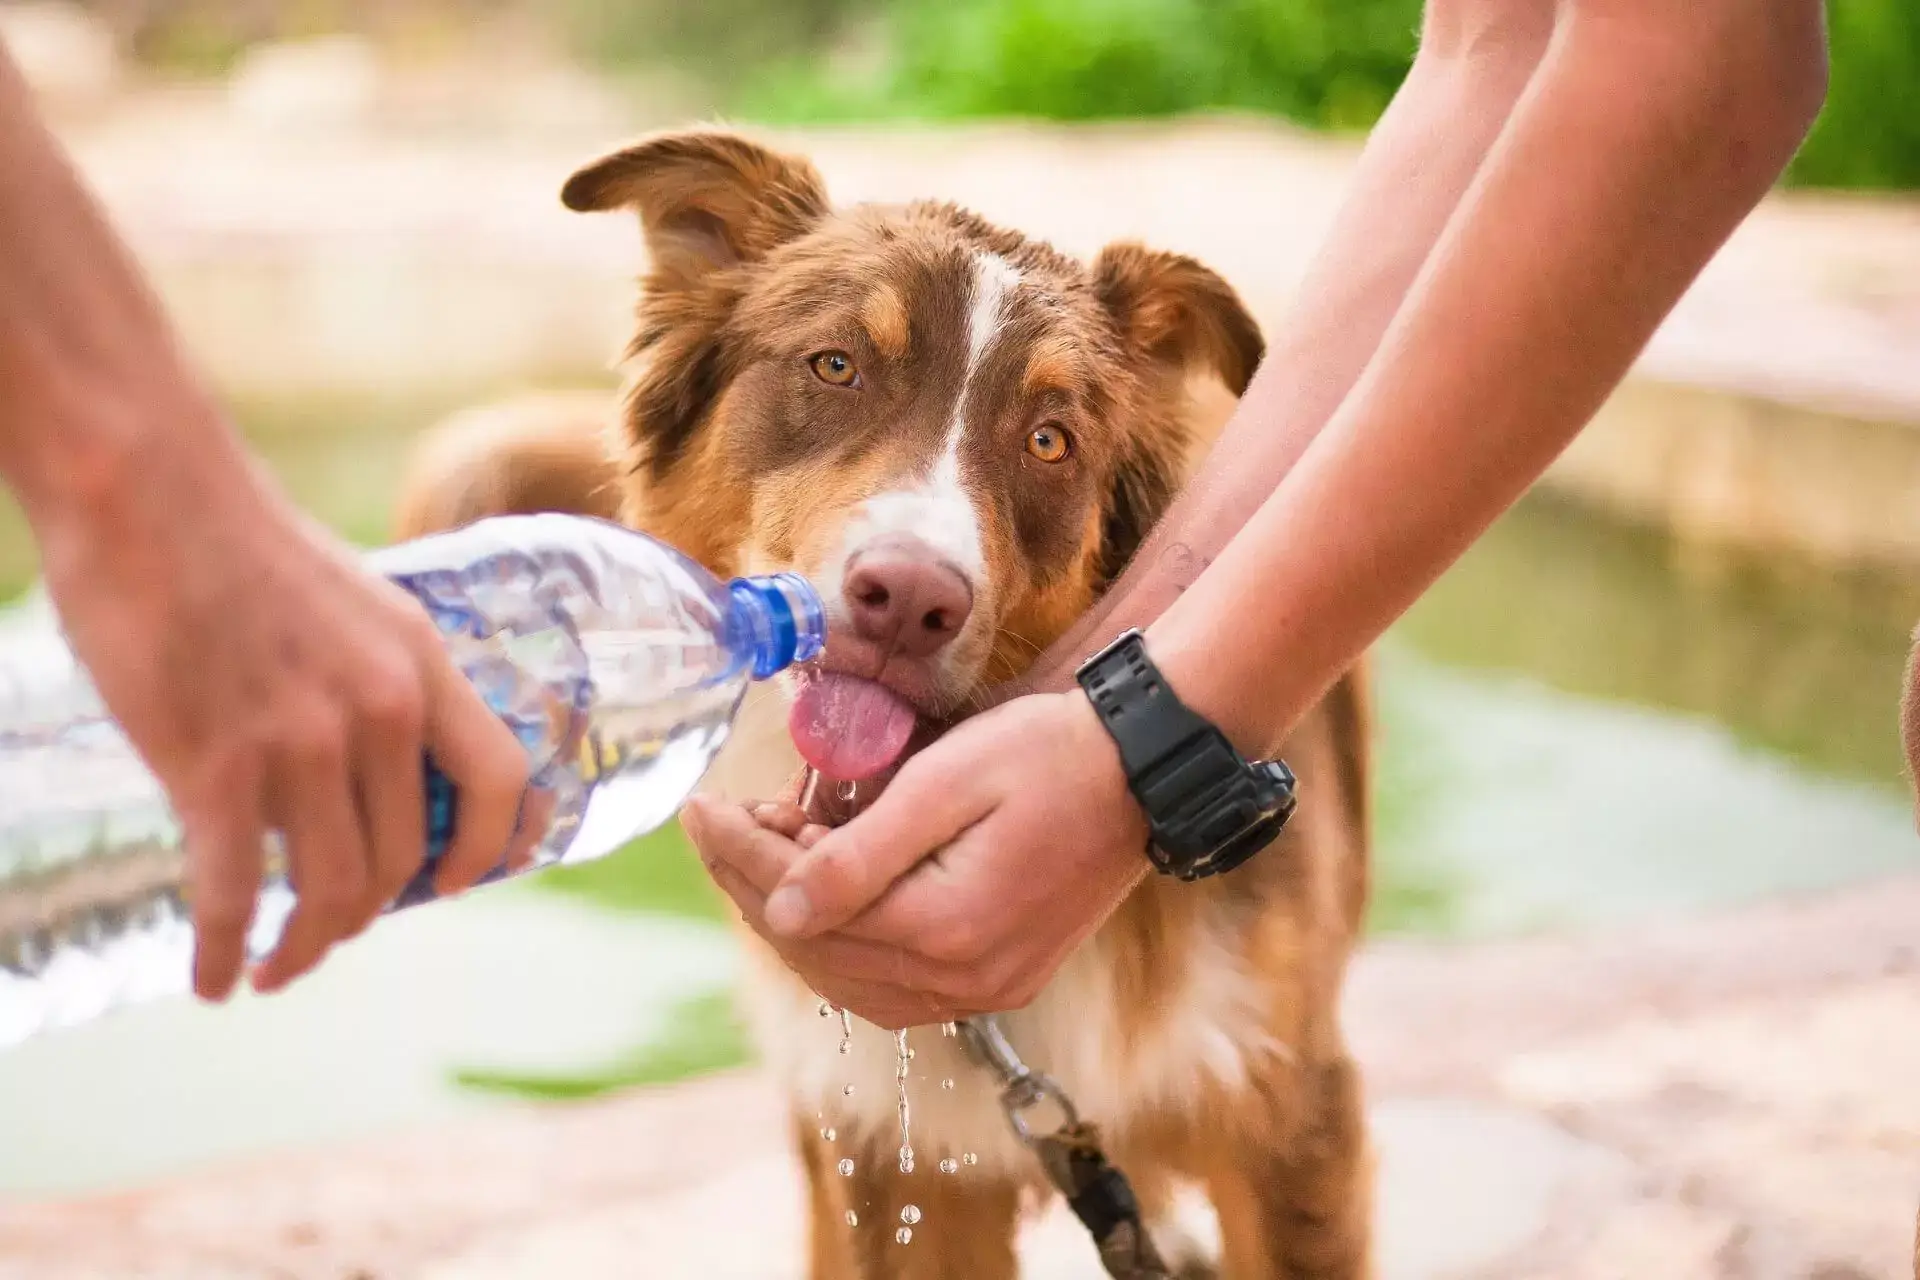 Thirsty dog being given water from a water bottle